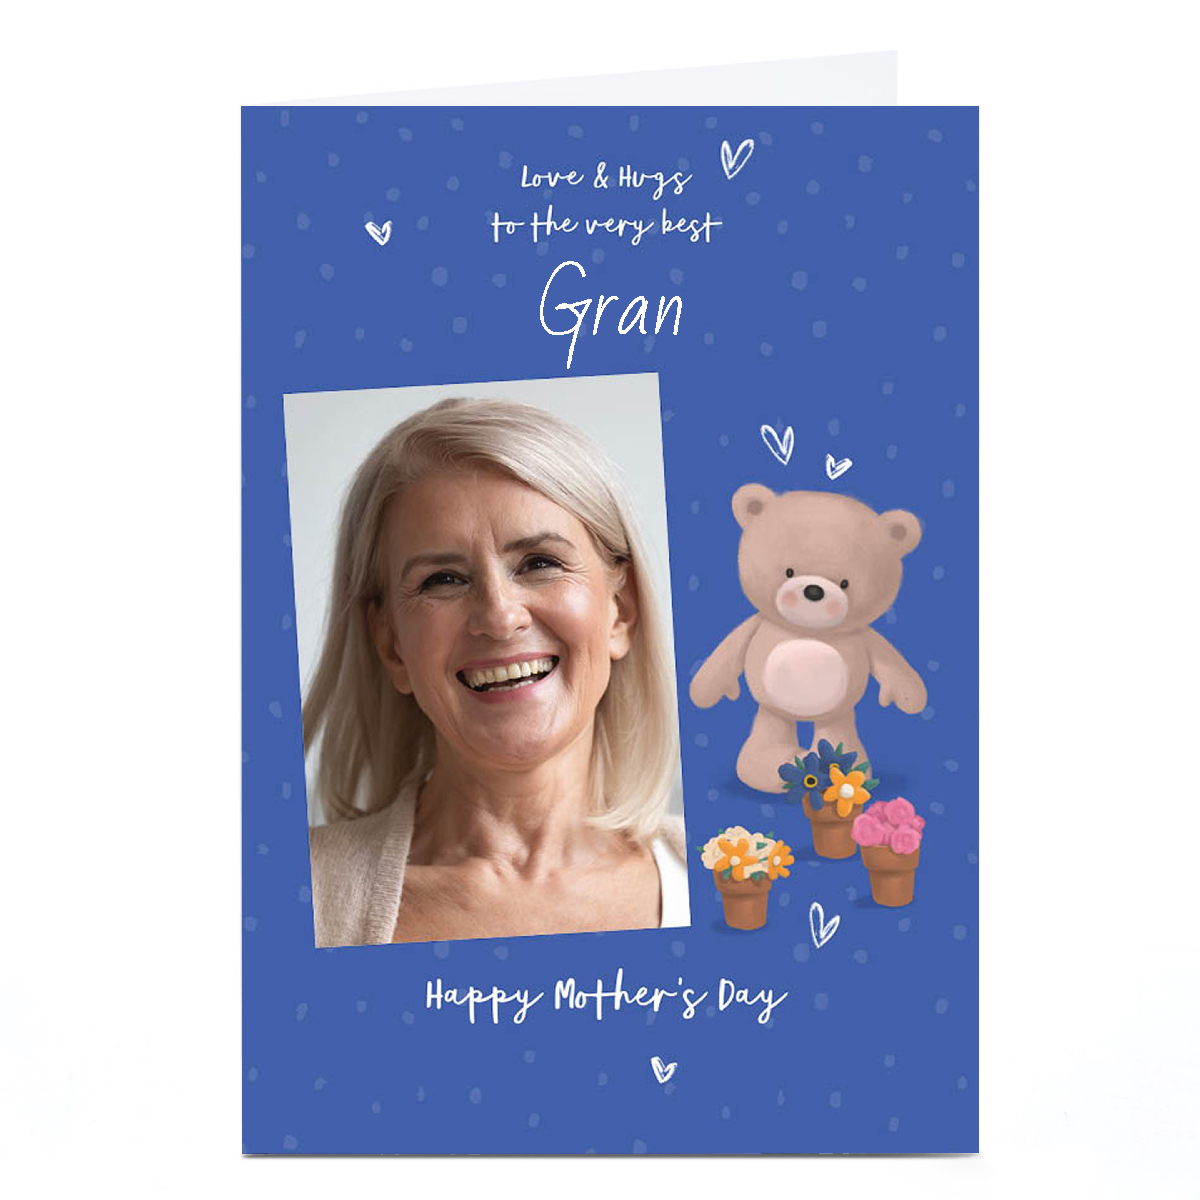 Personalised Mother's Day Card - Hugs Bear with flowers - Gran